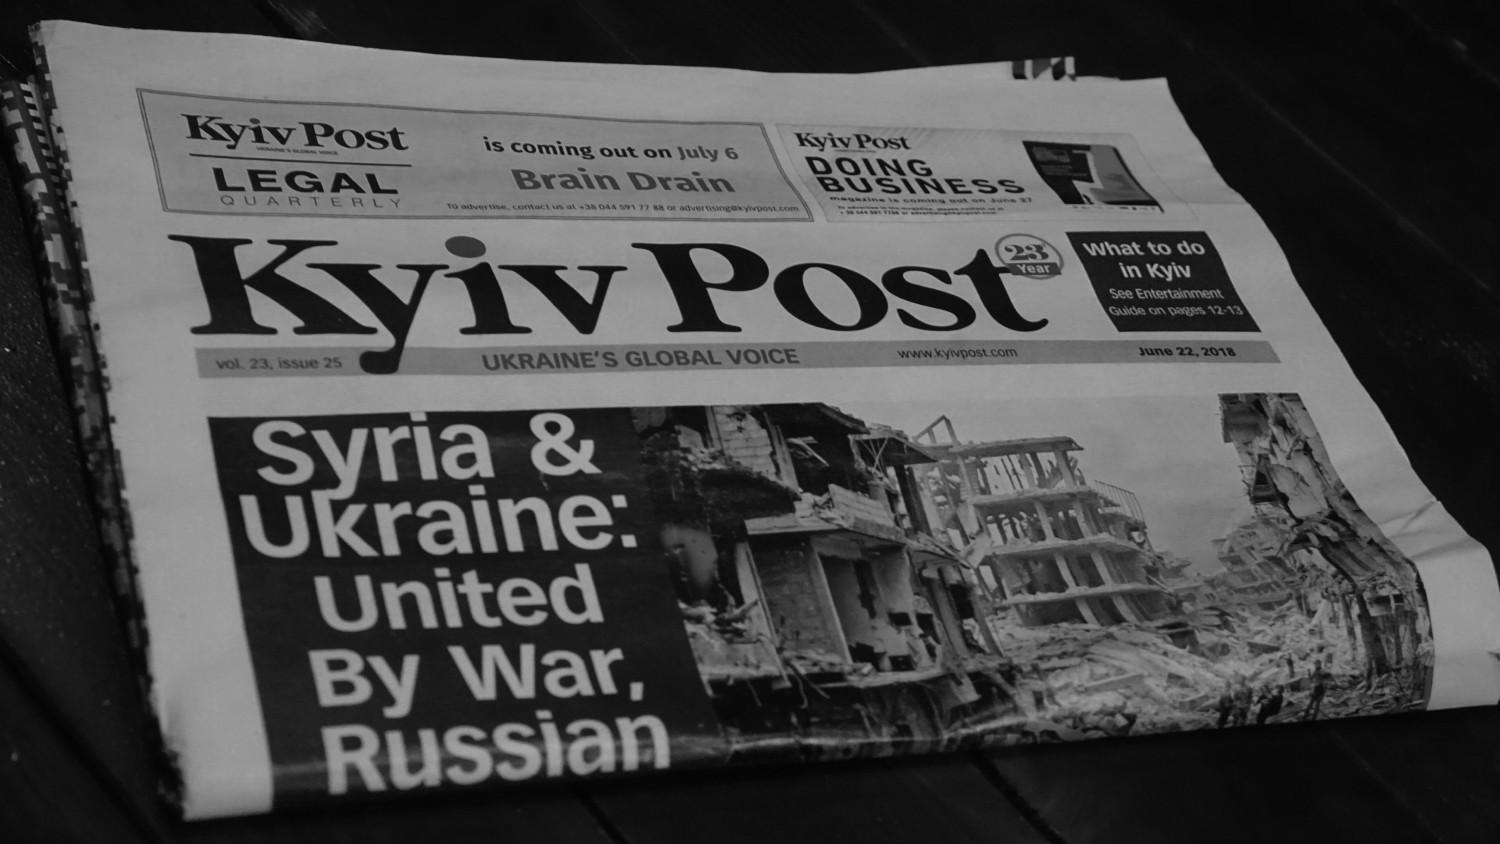 10 reasons why chief editor of Kyiv Post is not after objectivity 2